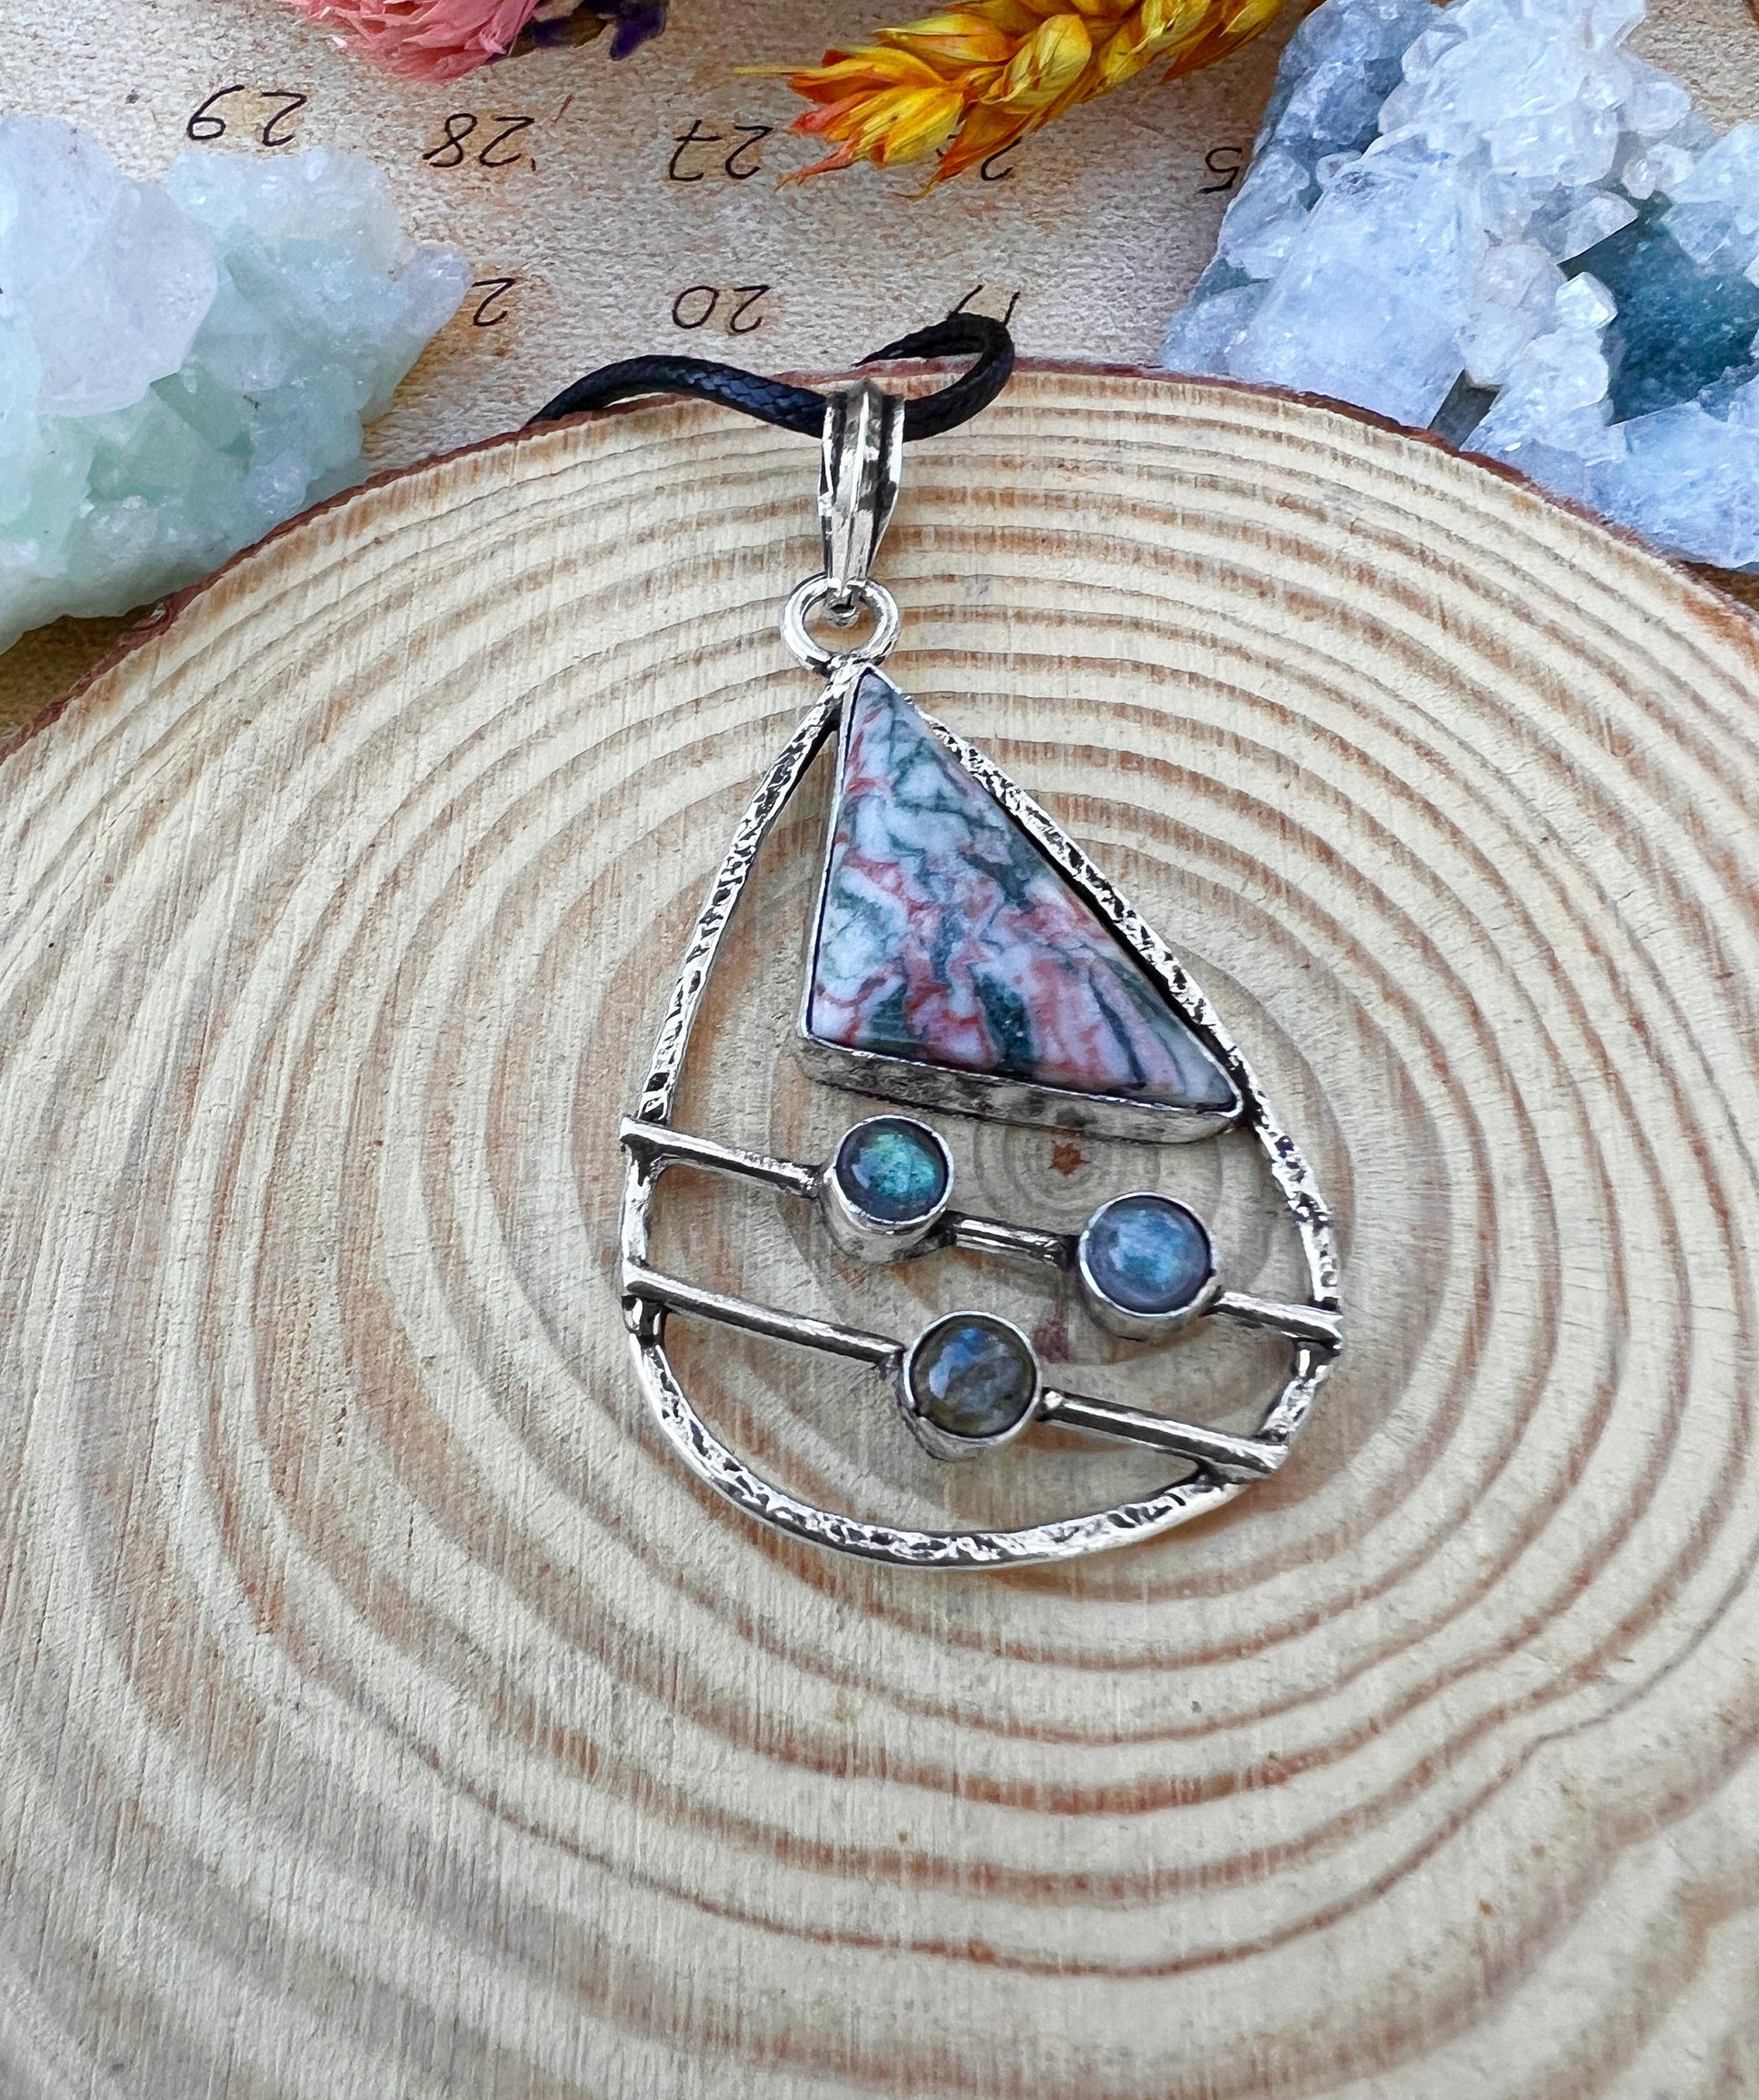 Multi Stone Pendant In Sterling Silver, Statement Pendant, Crystal Necklace, Rainbow Moonstone Pendant